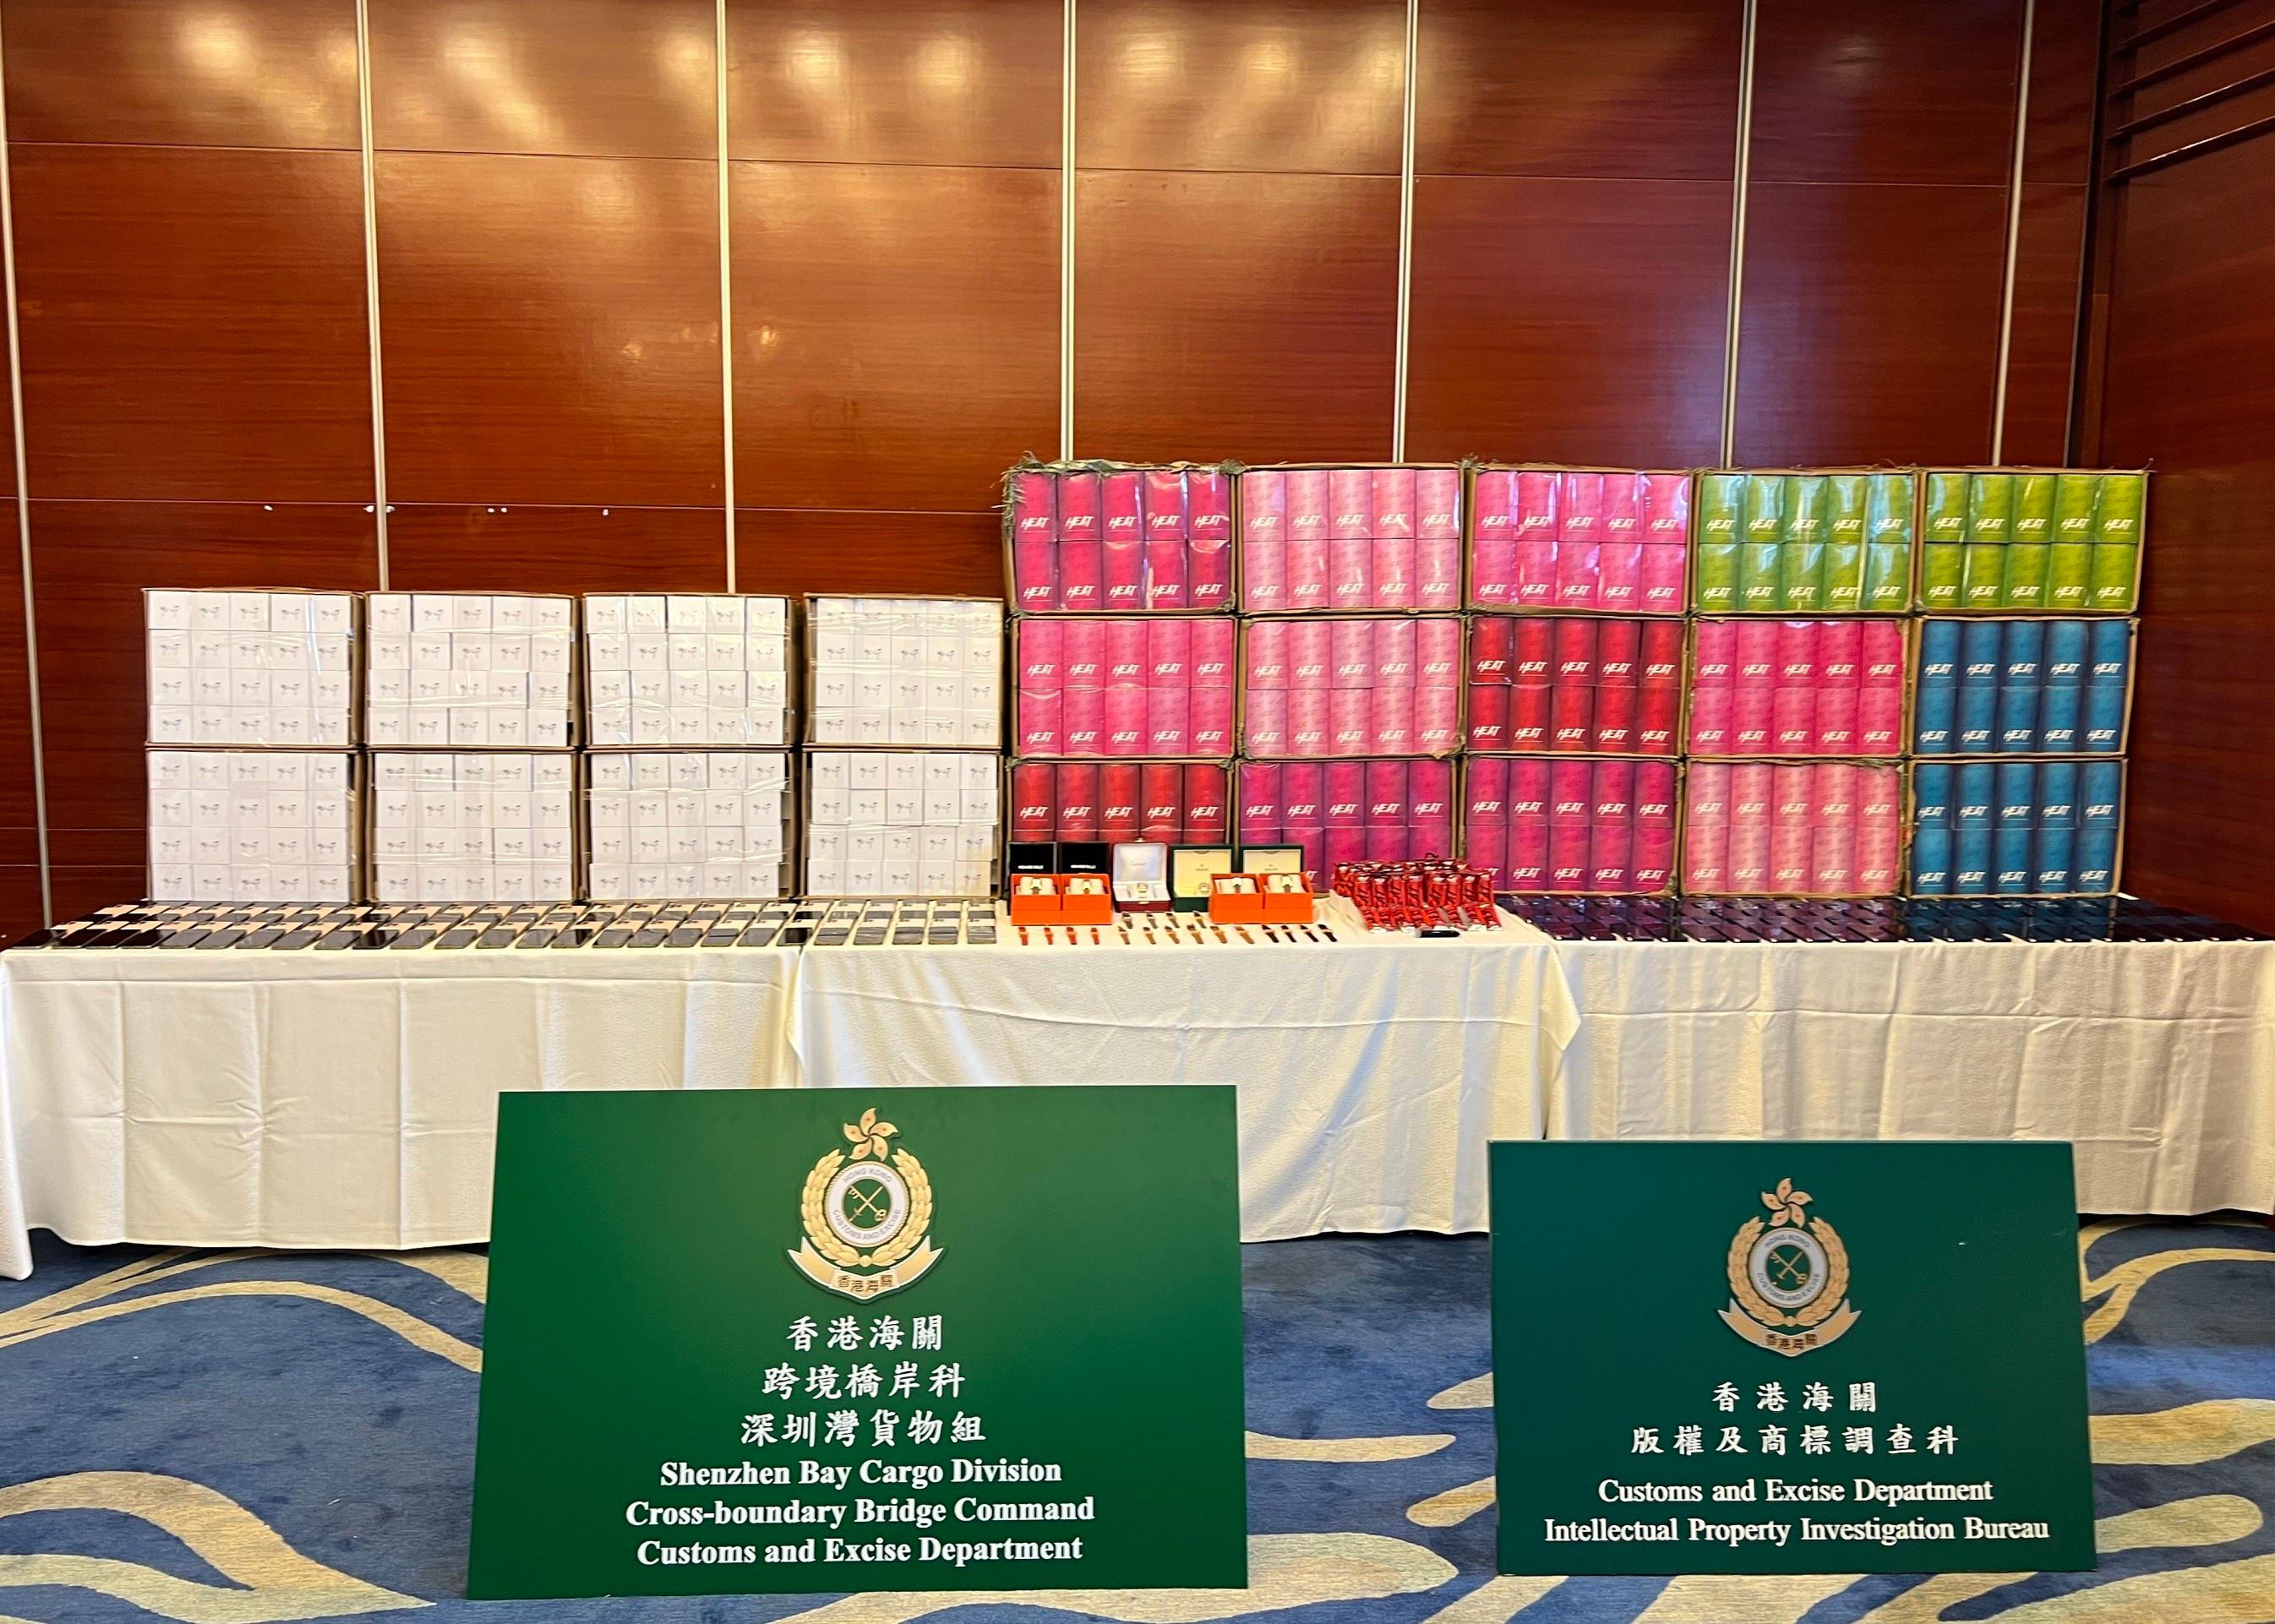 Hong Kong Customs conducted a series of operations between May 17 and June 9 to combat cross-boundary transshipment and local sale of counterfeit goods and detected 11 cases in total. About 10 000 items of suspected counterfeit goods, including footwear, mobile phones, clothing, watches, handbags and fashion accessories, and about 9 300 suspected alternative smoking products (ASPs), with an estimated market value of over $11.6 million, were seized. Photo shows some of the suspected counterfeit goods and suspected ASPs seized.